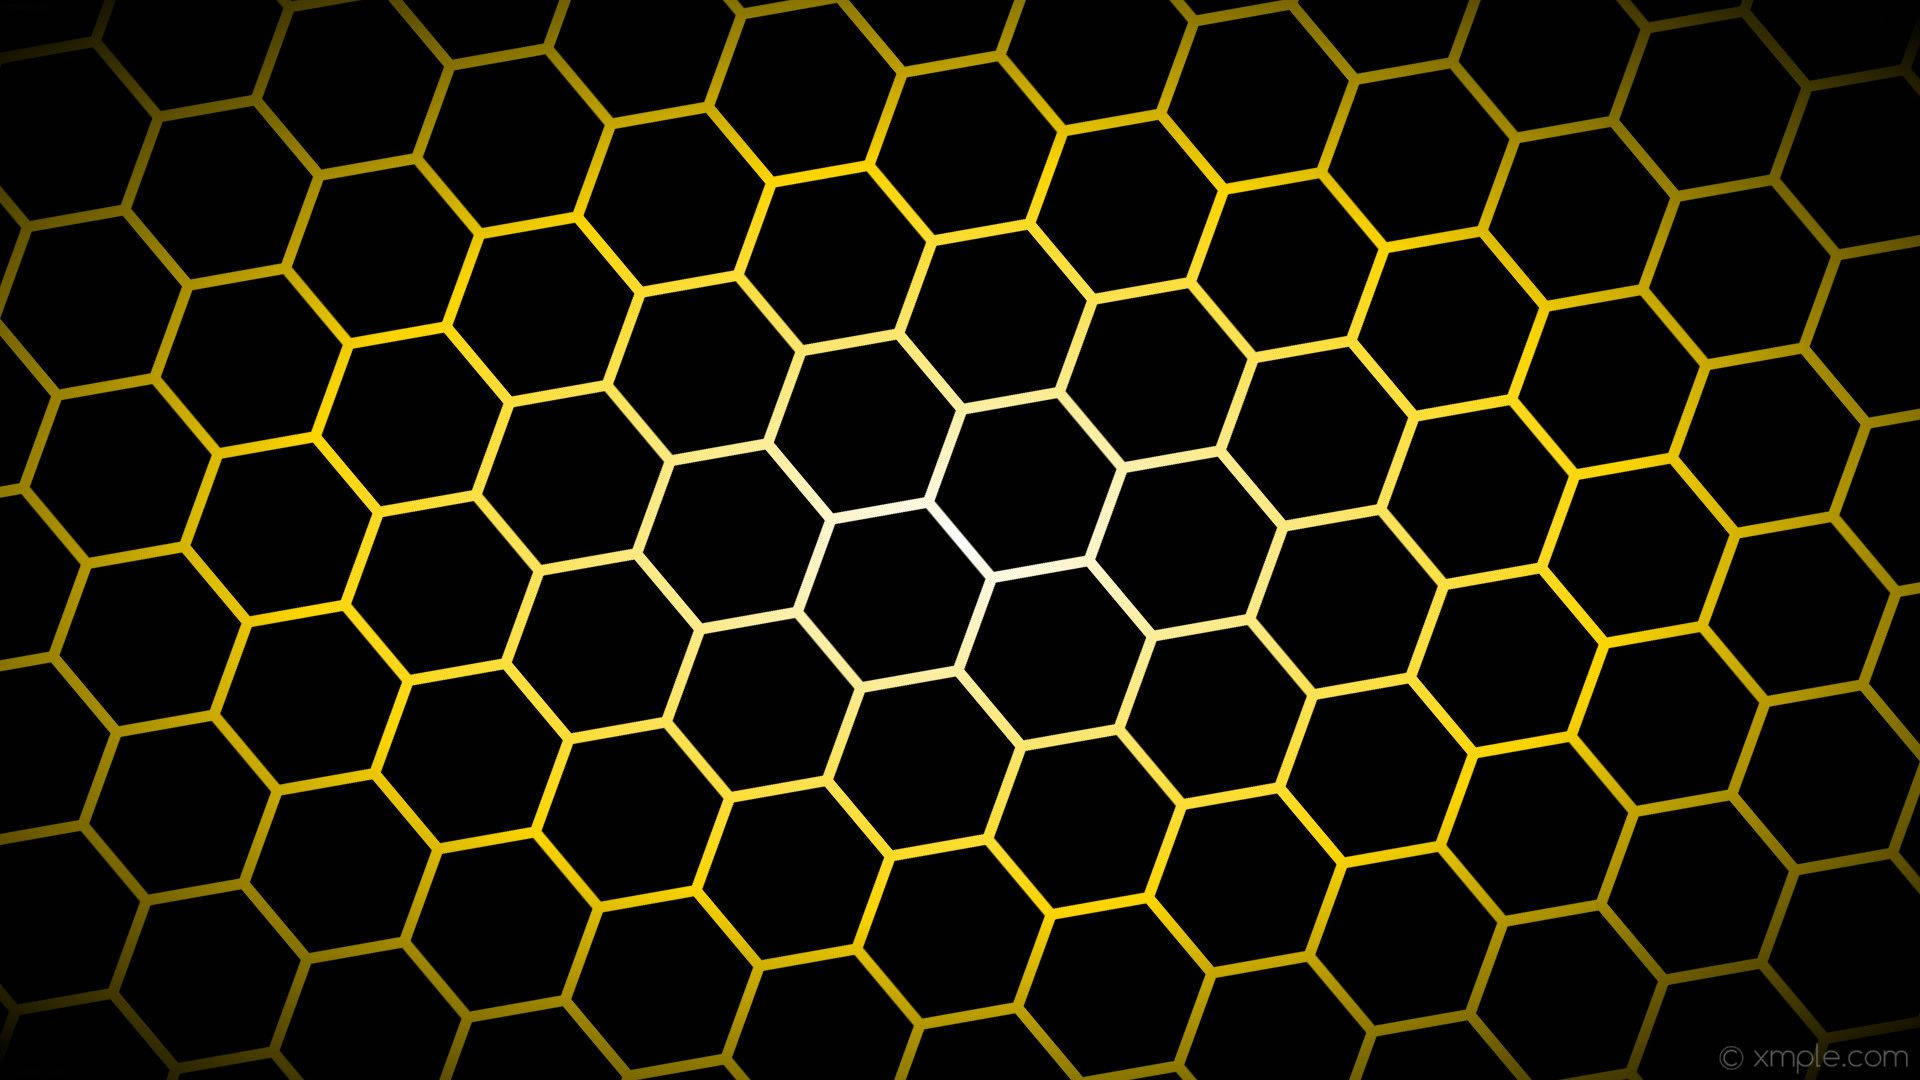 Black And Gold Honeycomb Pattern Wallpaper